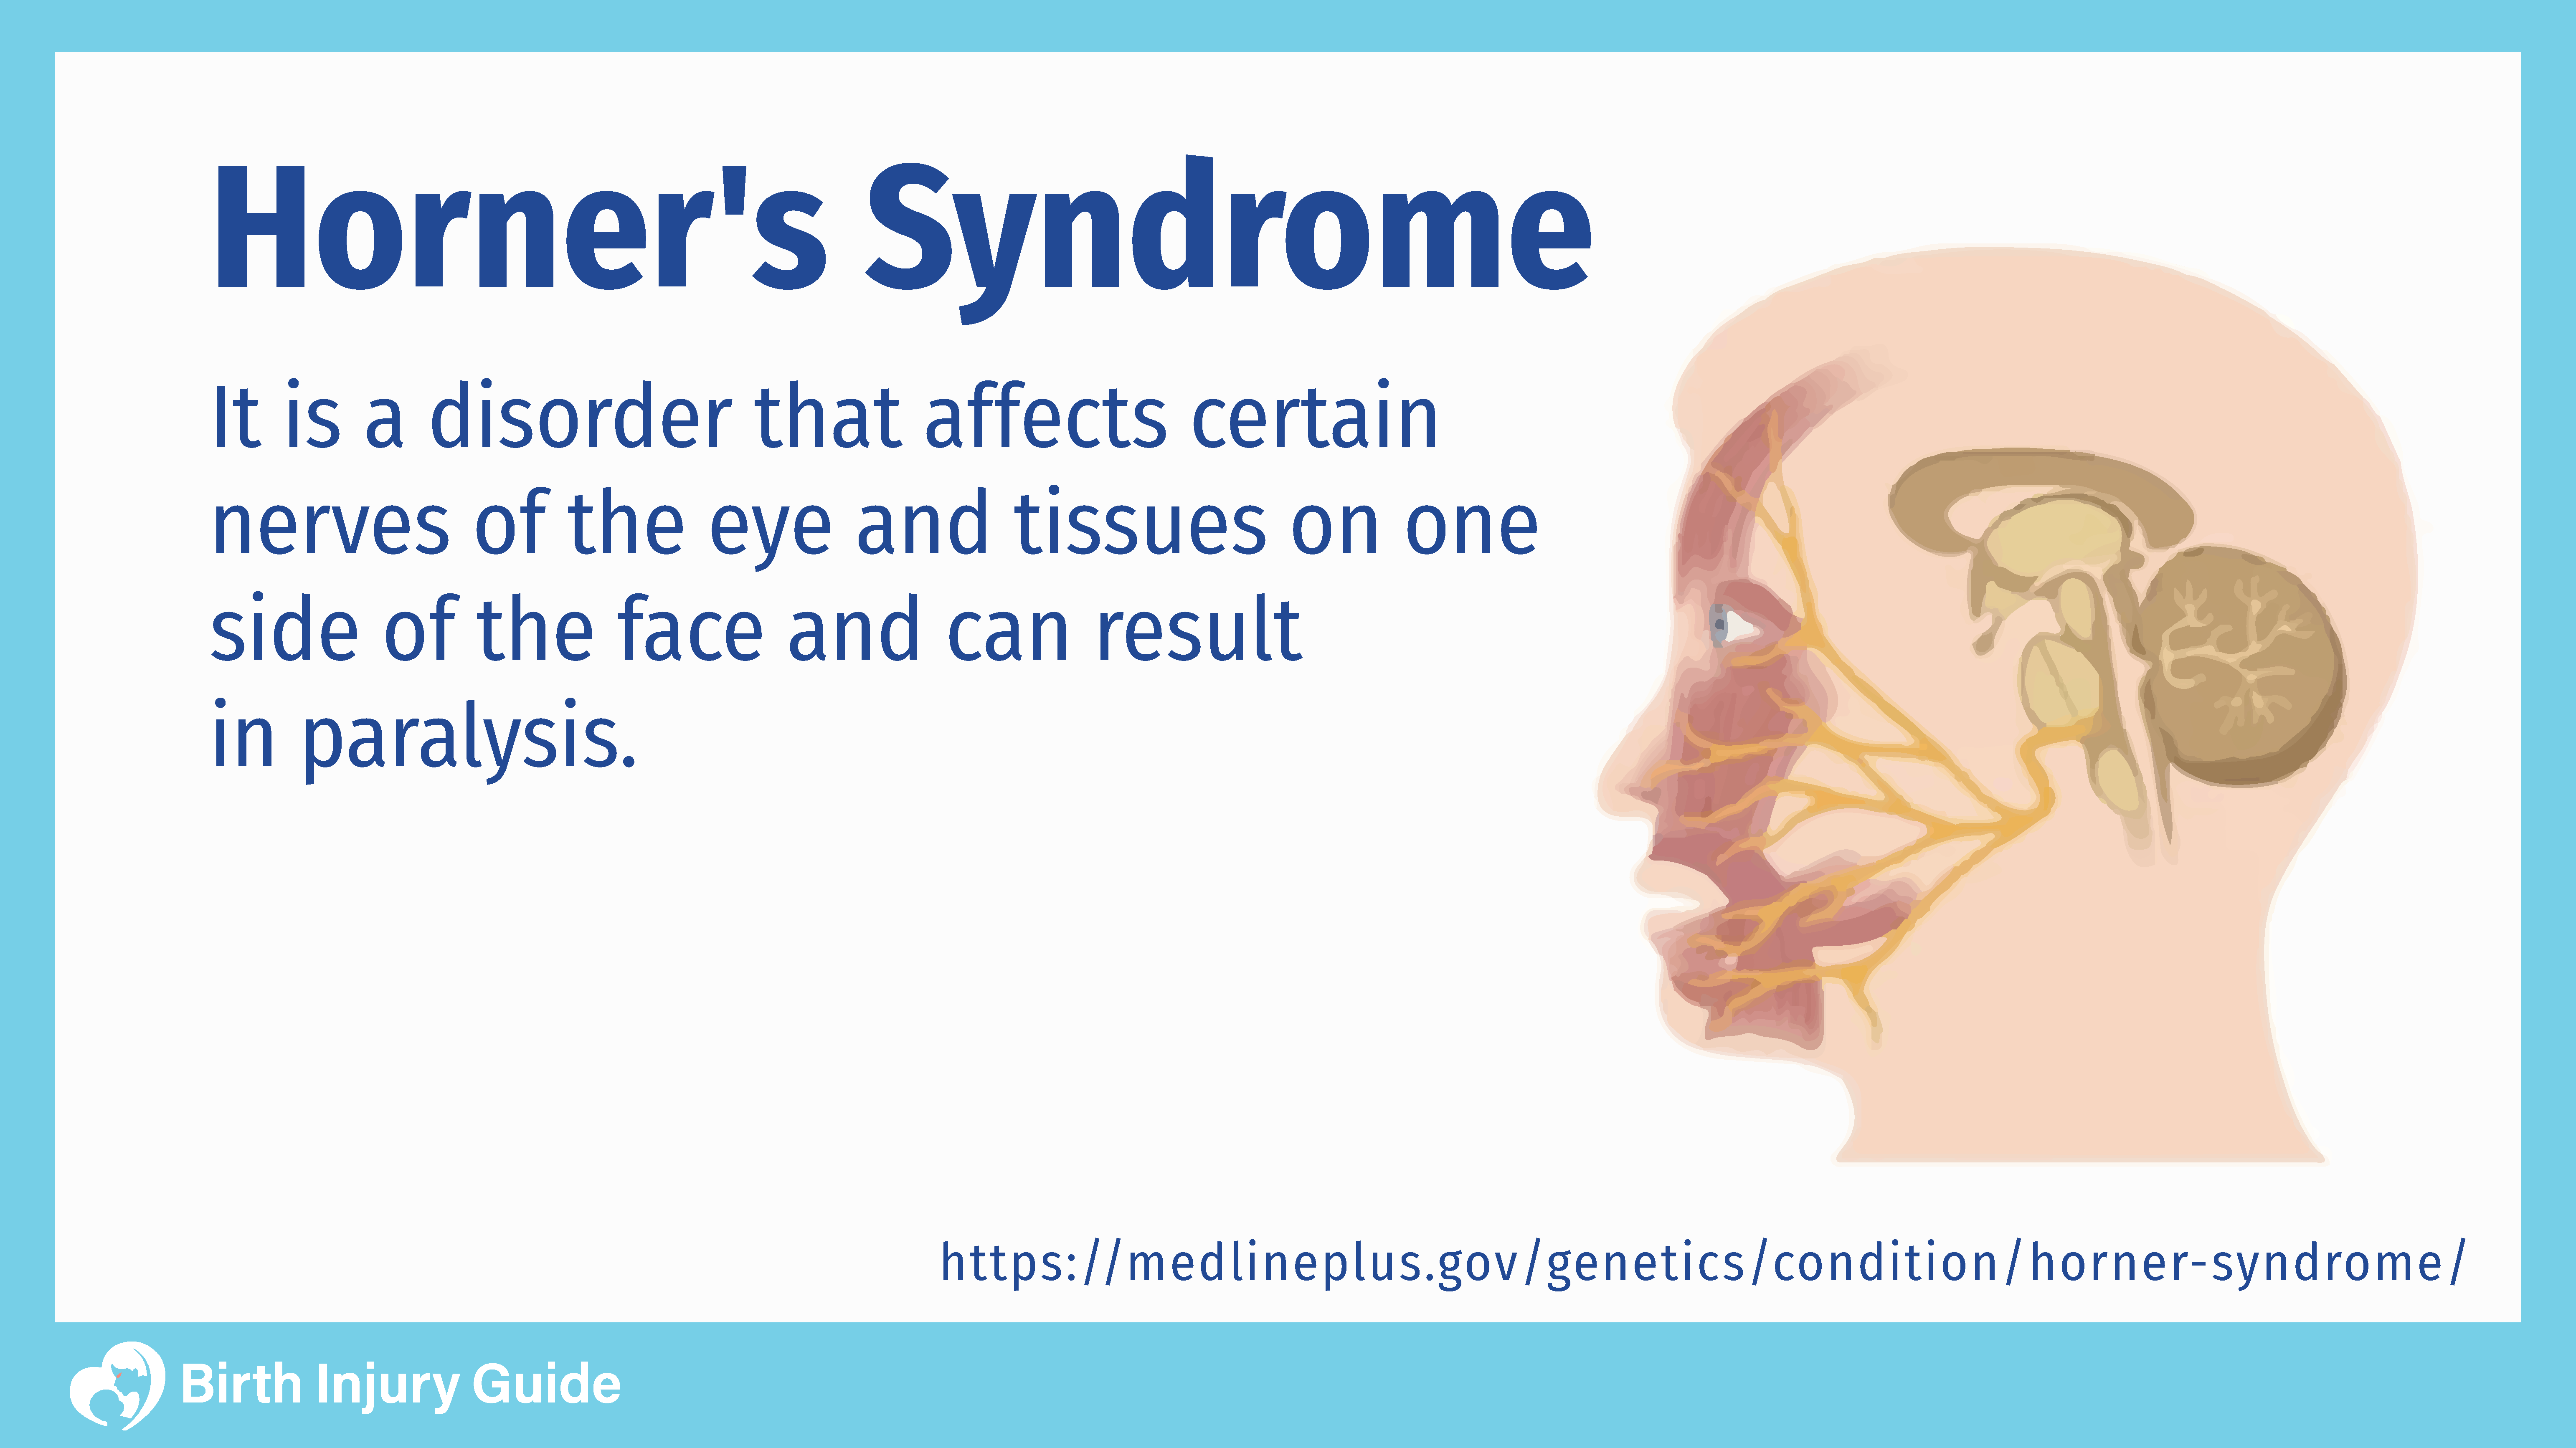 horner's syndrome disorder described. Human face paralyzed due to the syndrome affecting some nerves.